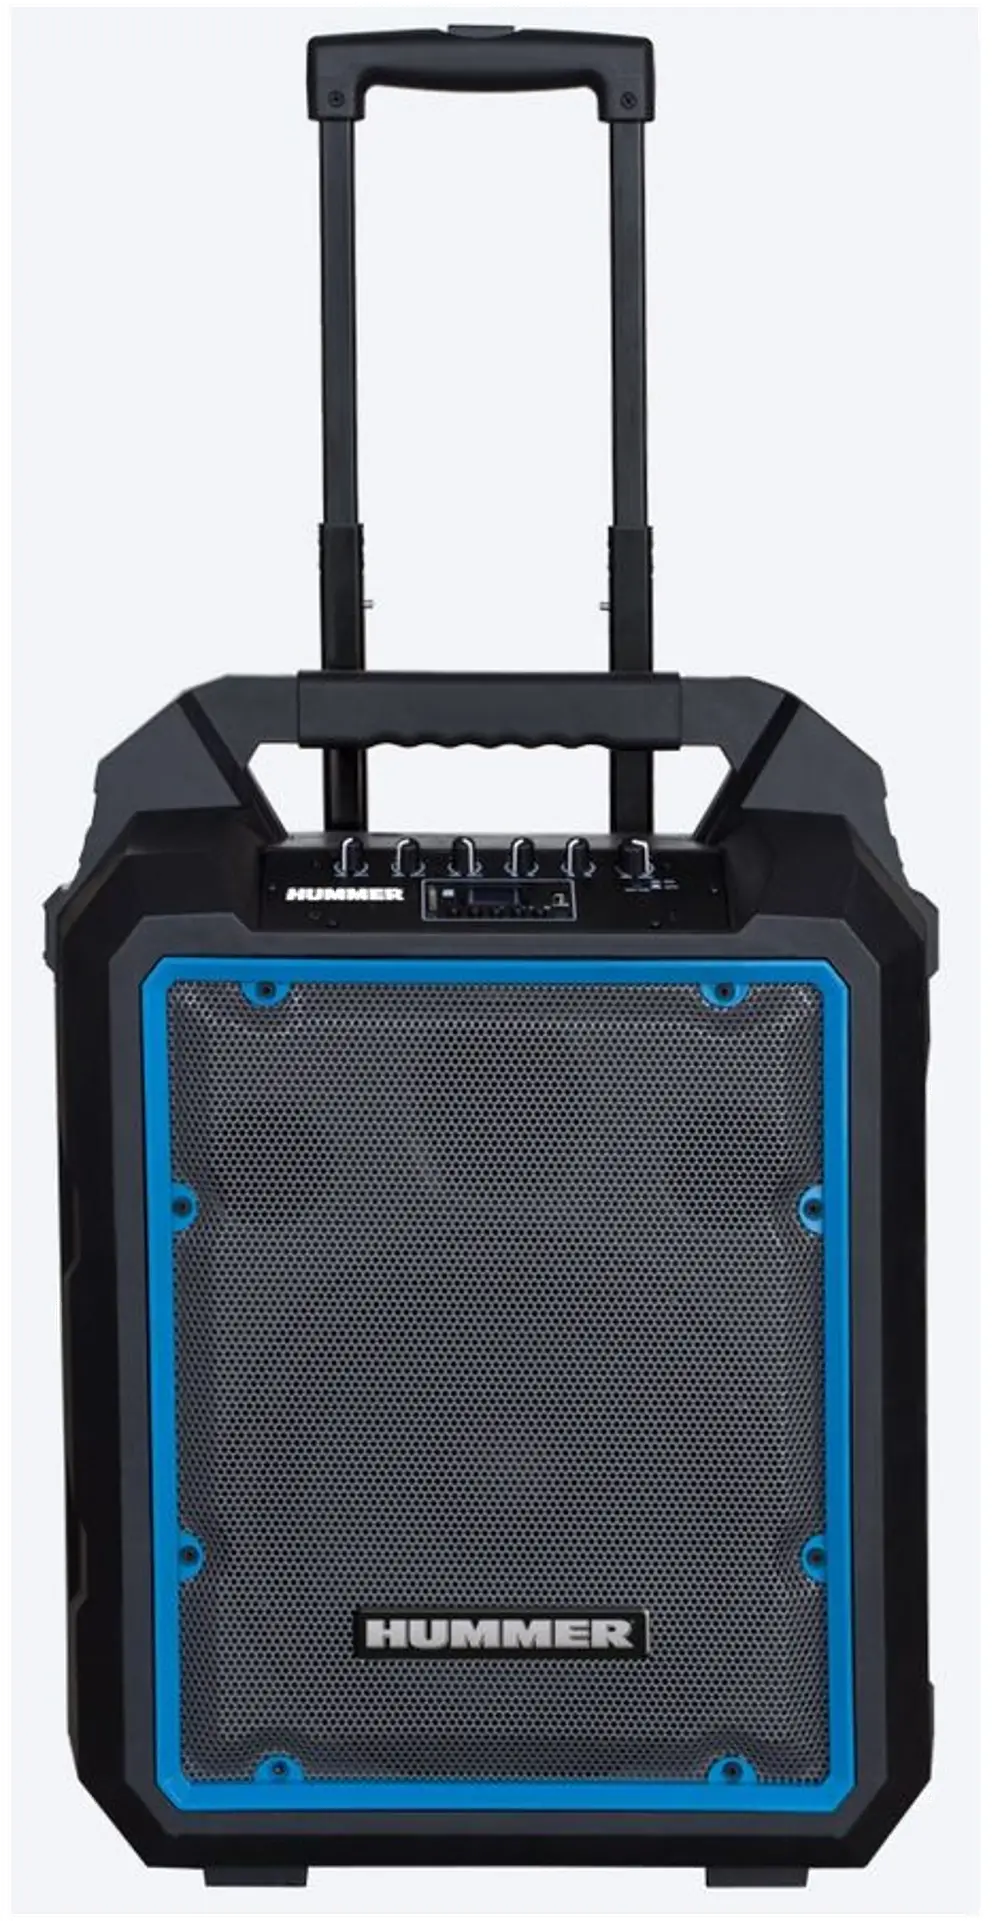 Hummer A1200 Tailgater Portable Rechargeable Bluetooth Speaker-1